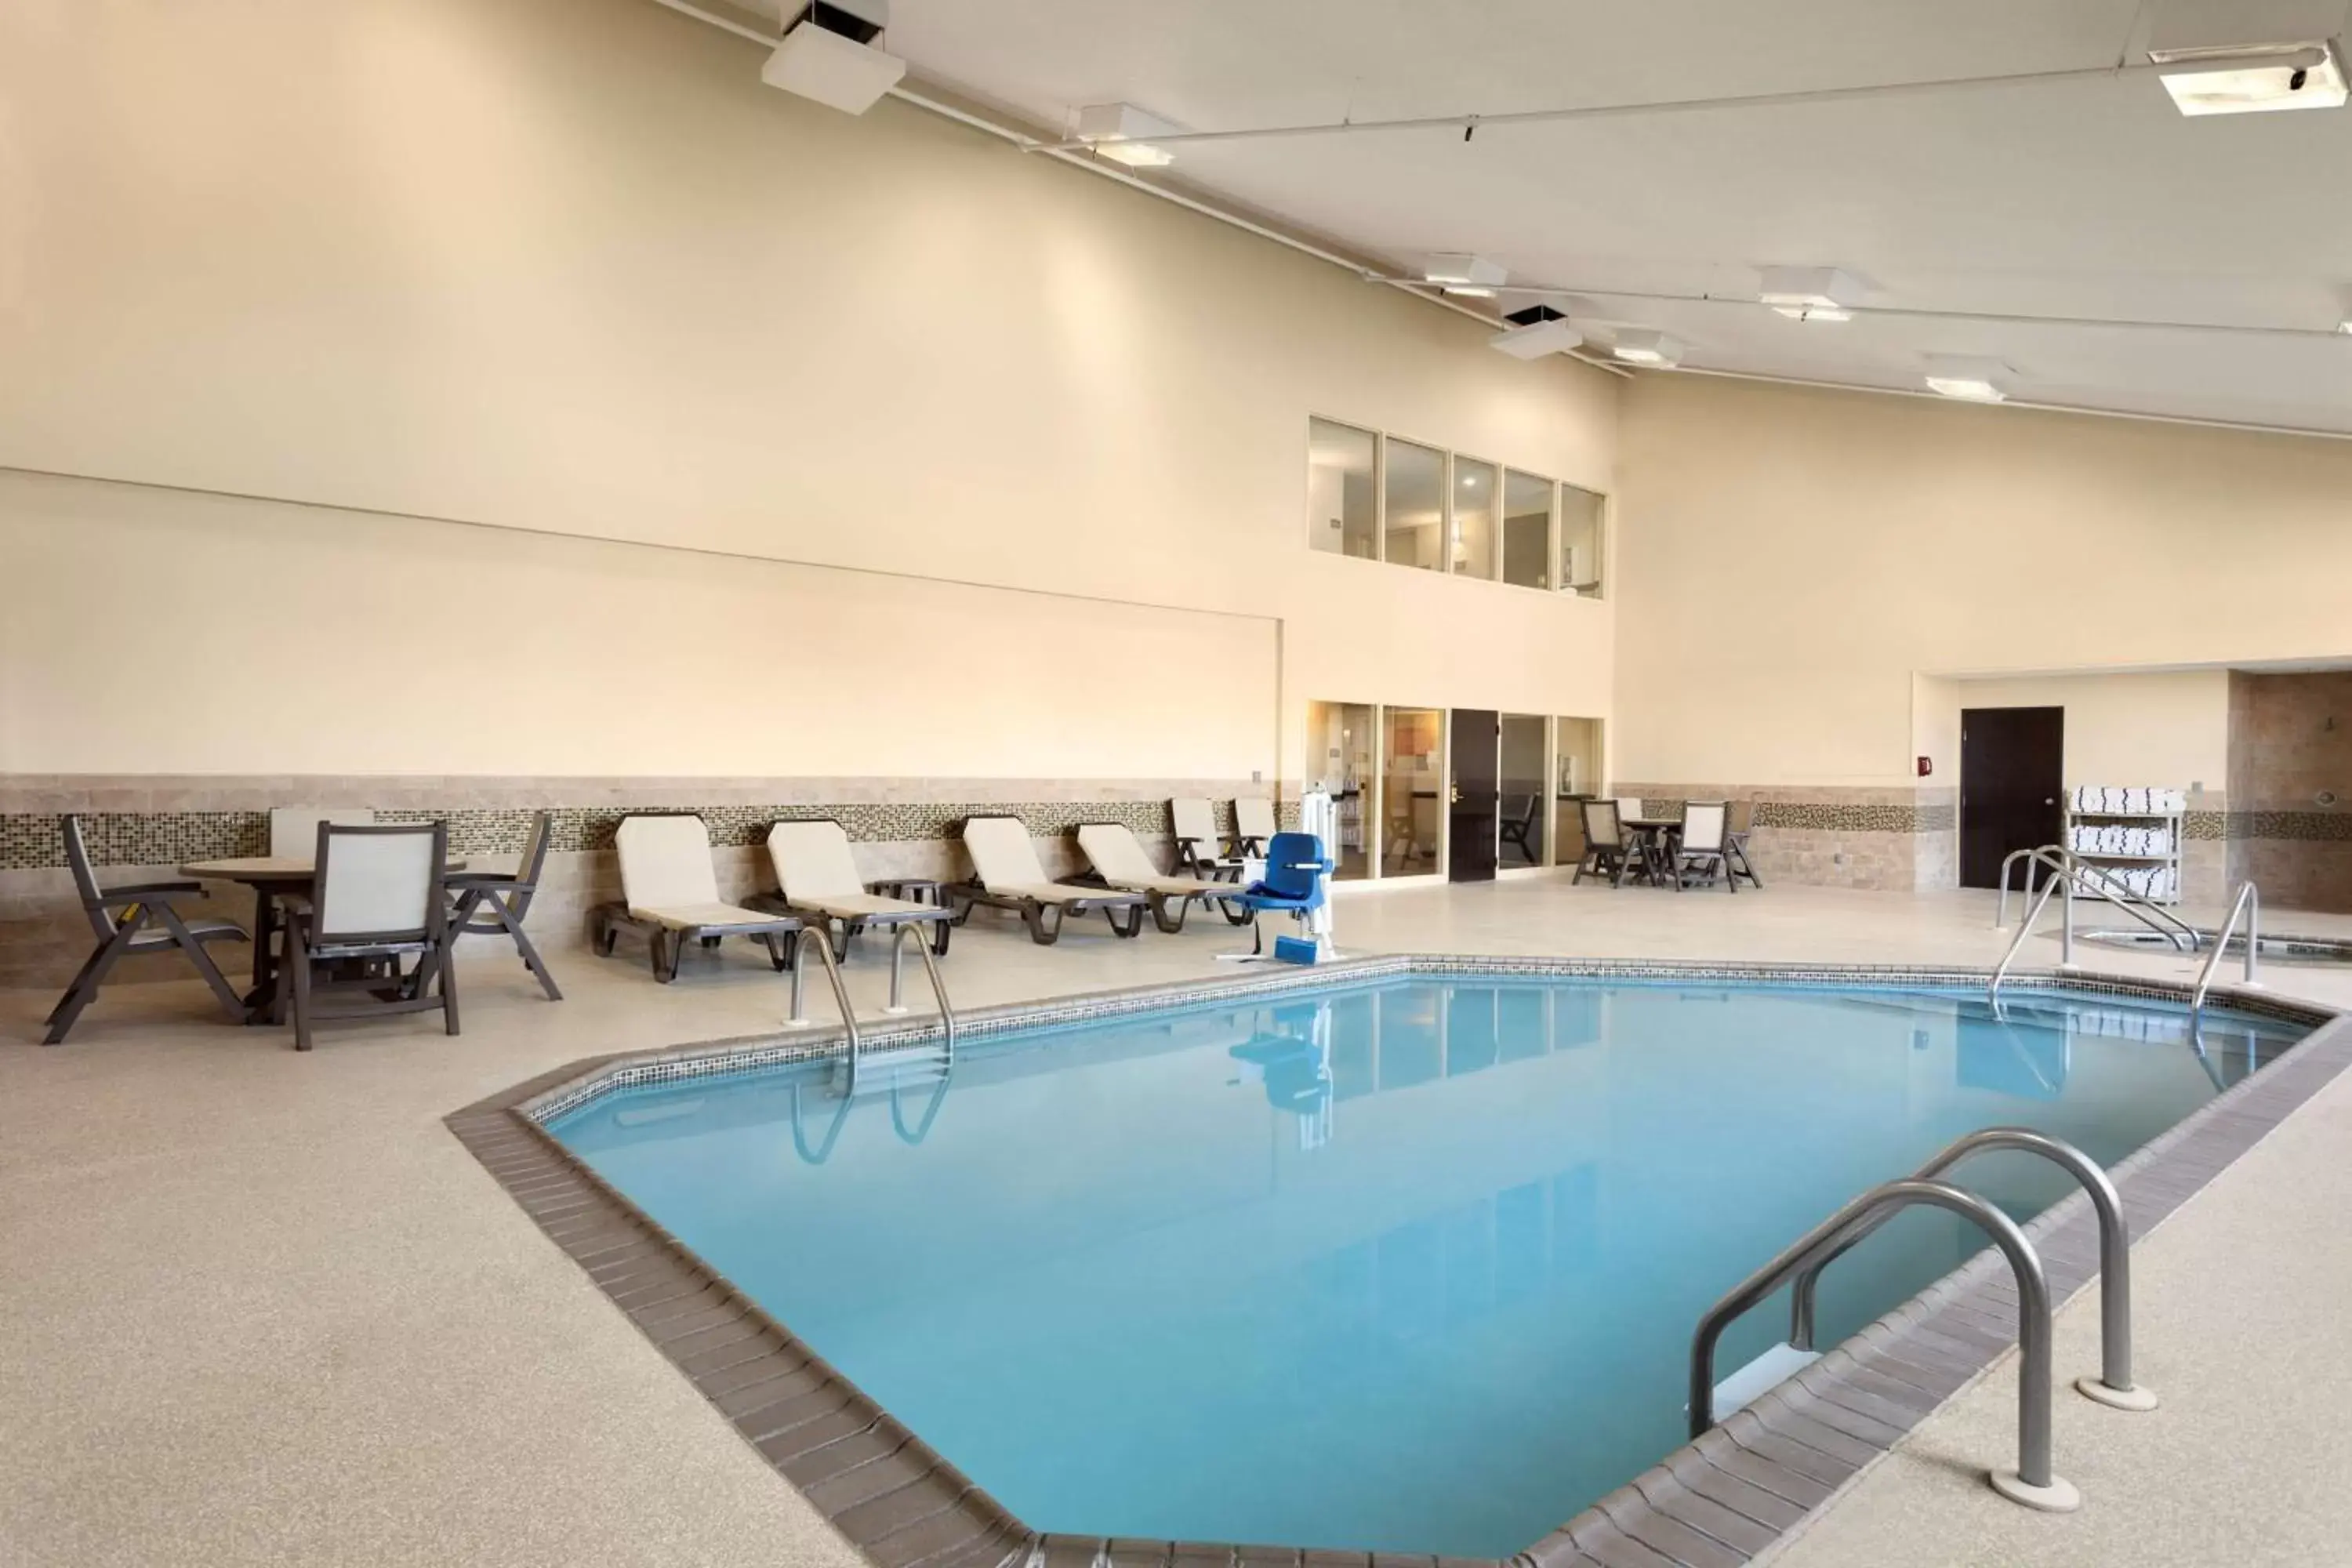 On site, Swimming Pool in Country Inn & Suites by Radisson, Coon Rapids, MN